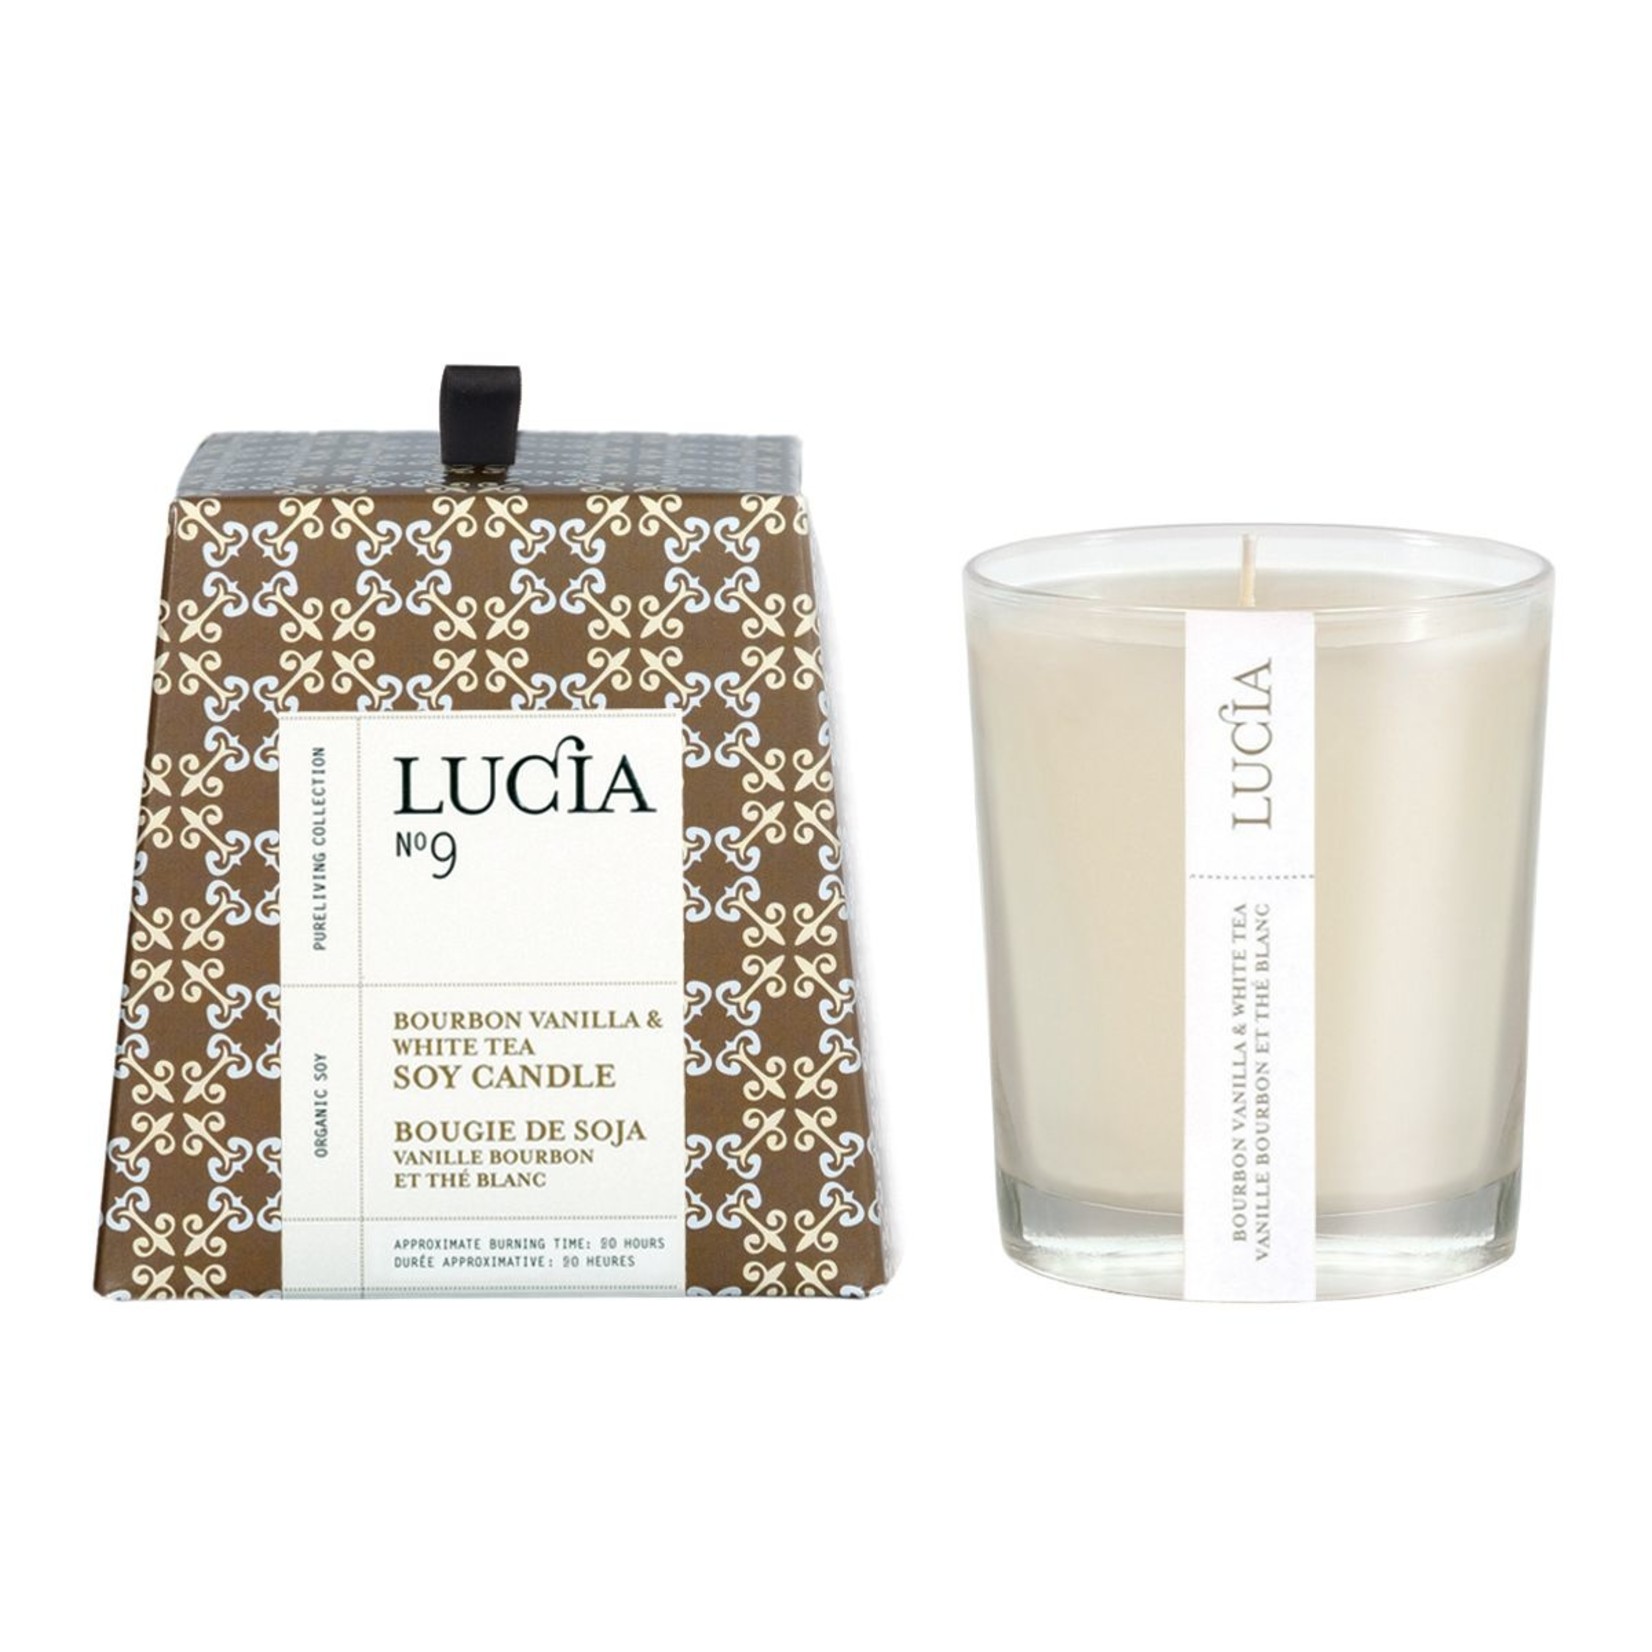 Lucia Lucia Scented Votive Candles